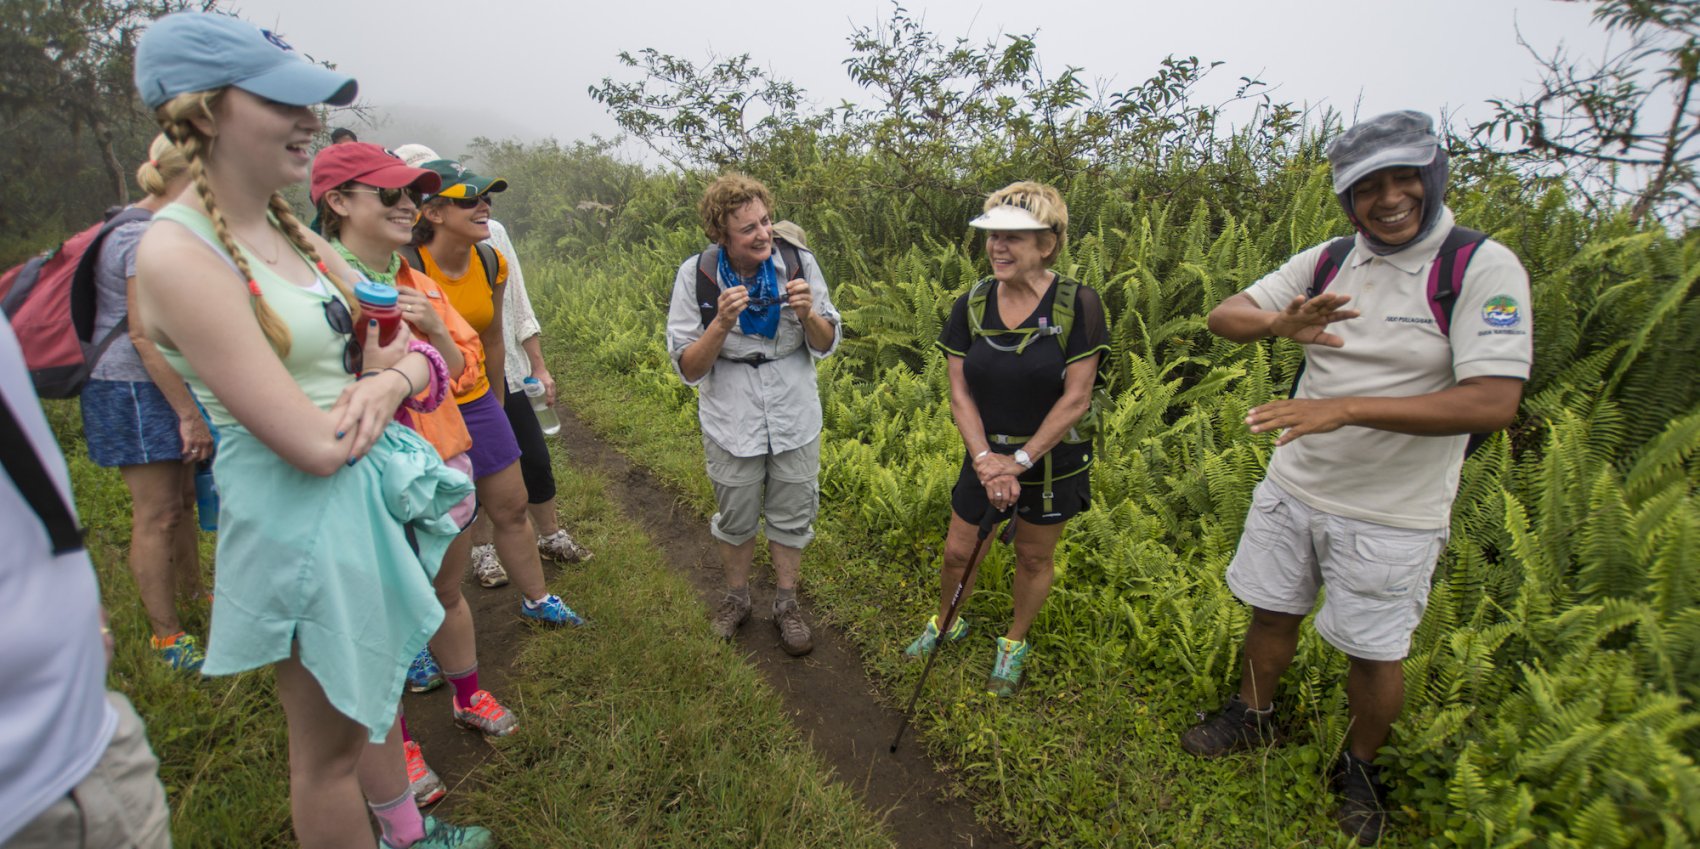 A group of tourists on a hike with an Ecuadorian guide in the Galapagos Islands